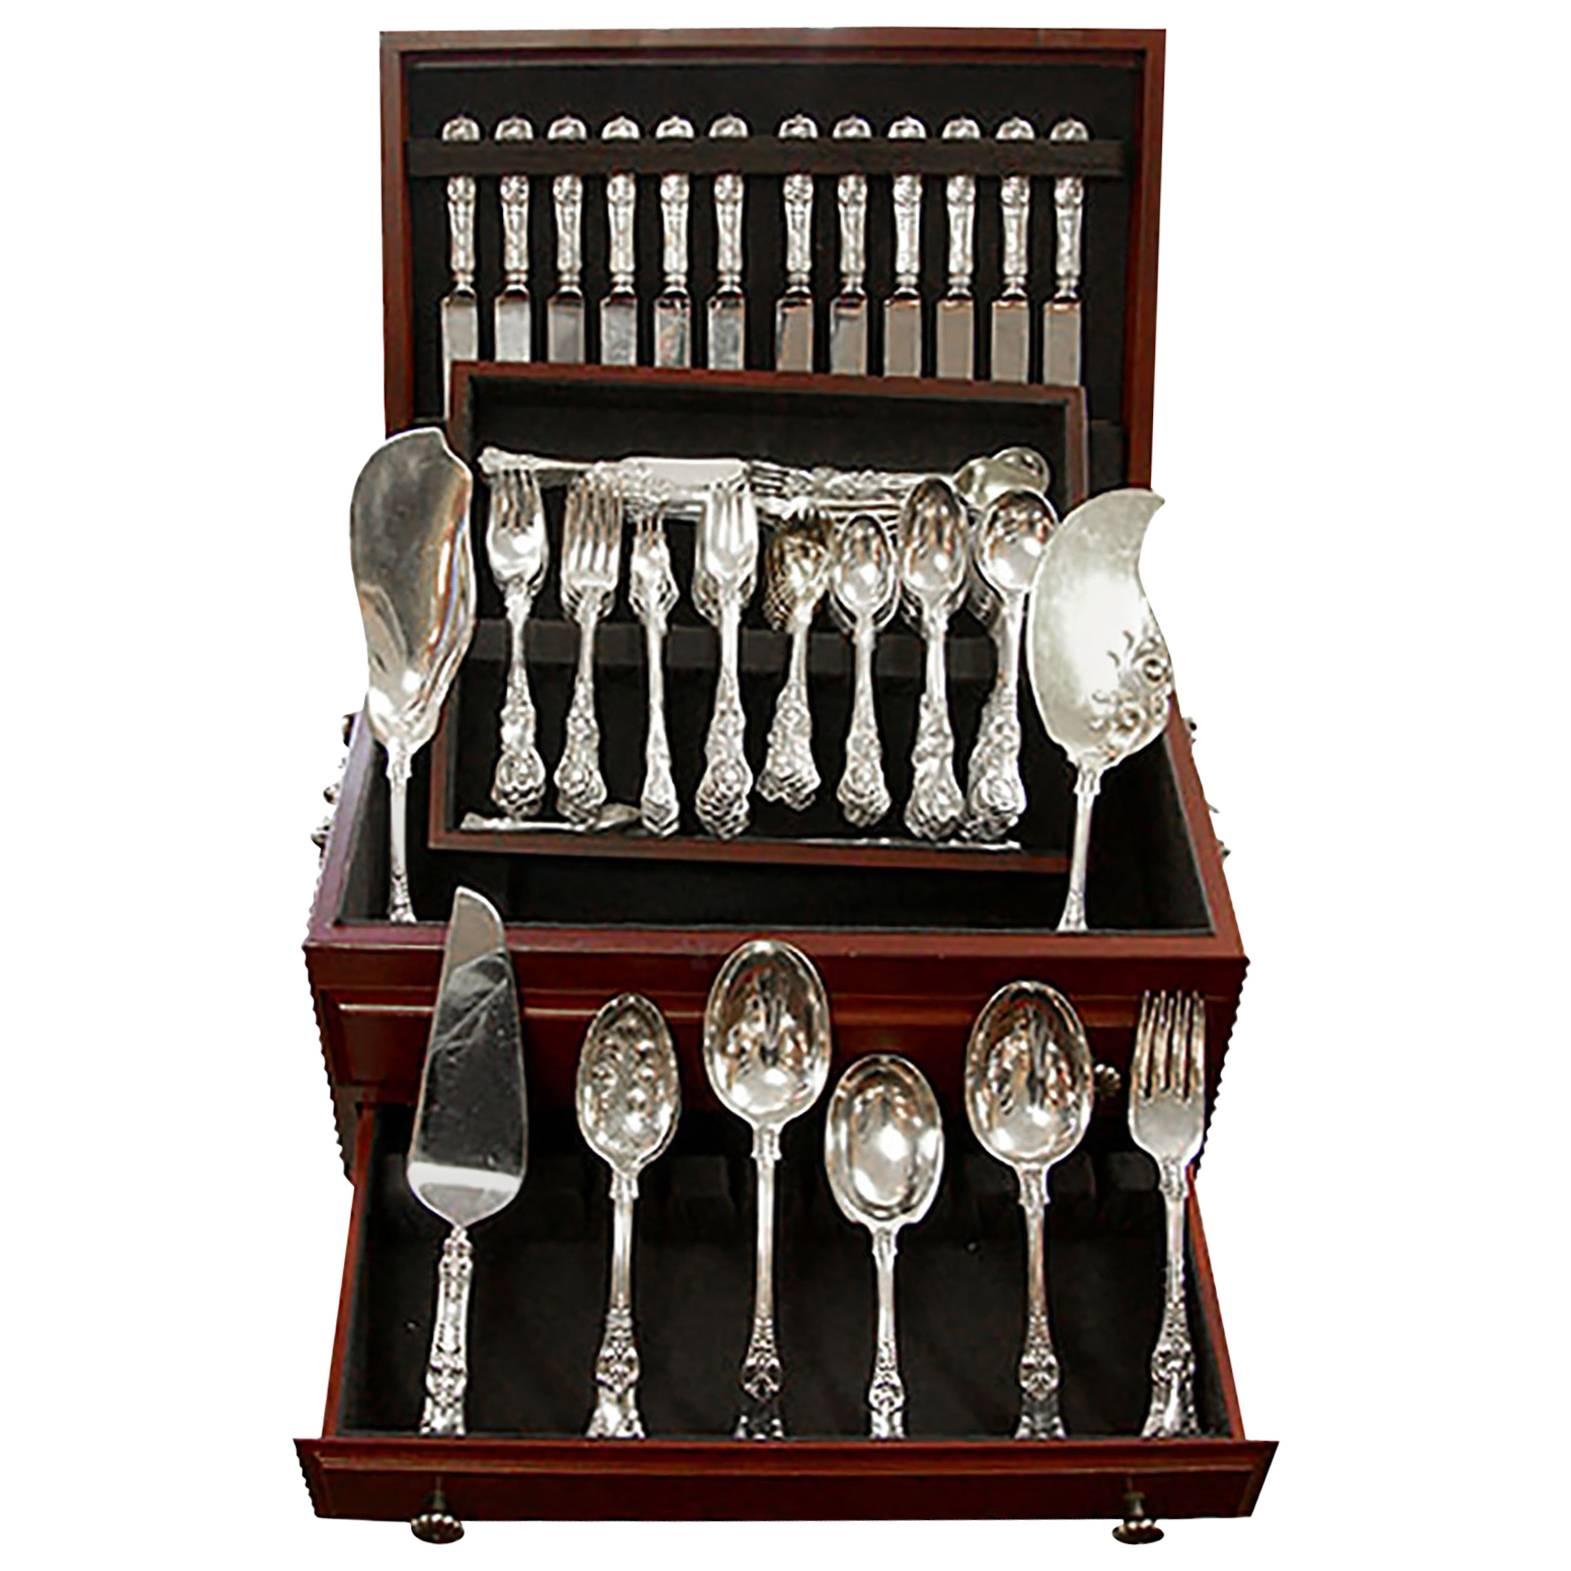 Tiffany English King 246 Piece Sterling Flatware Set For Sale